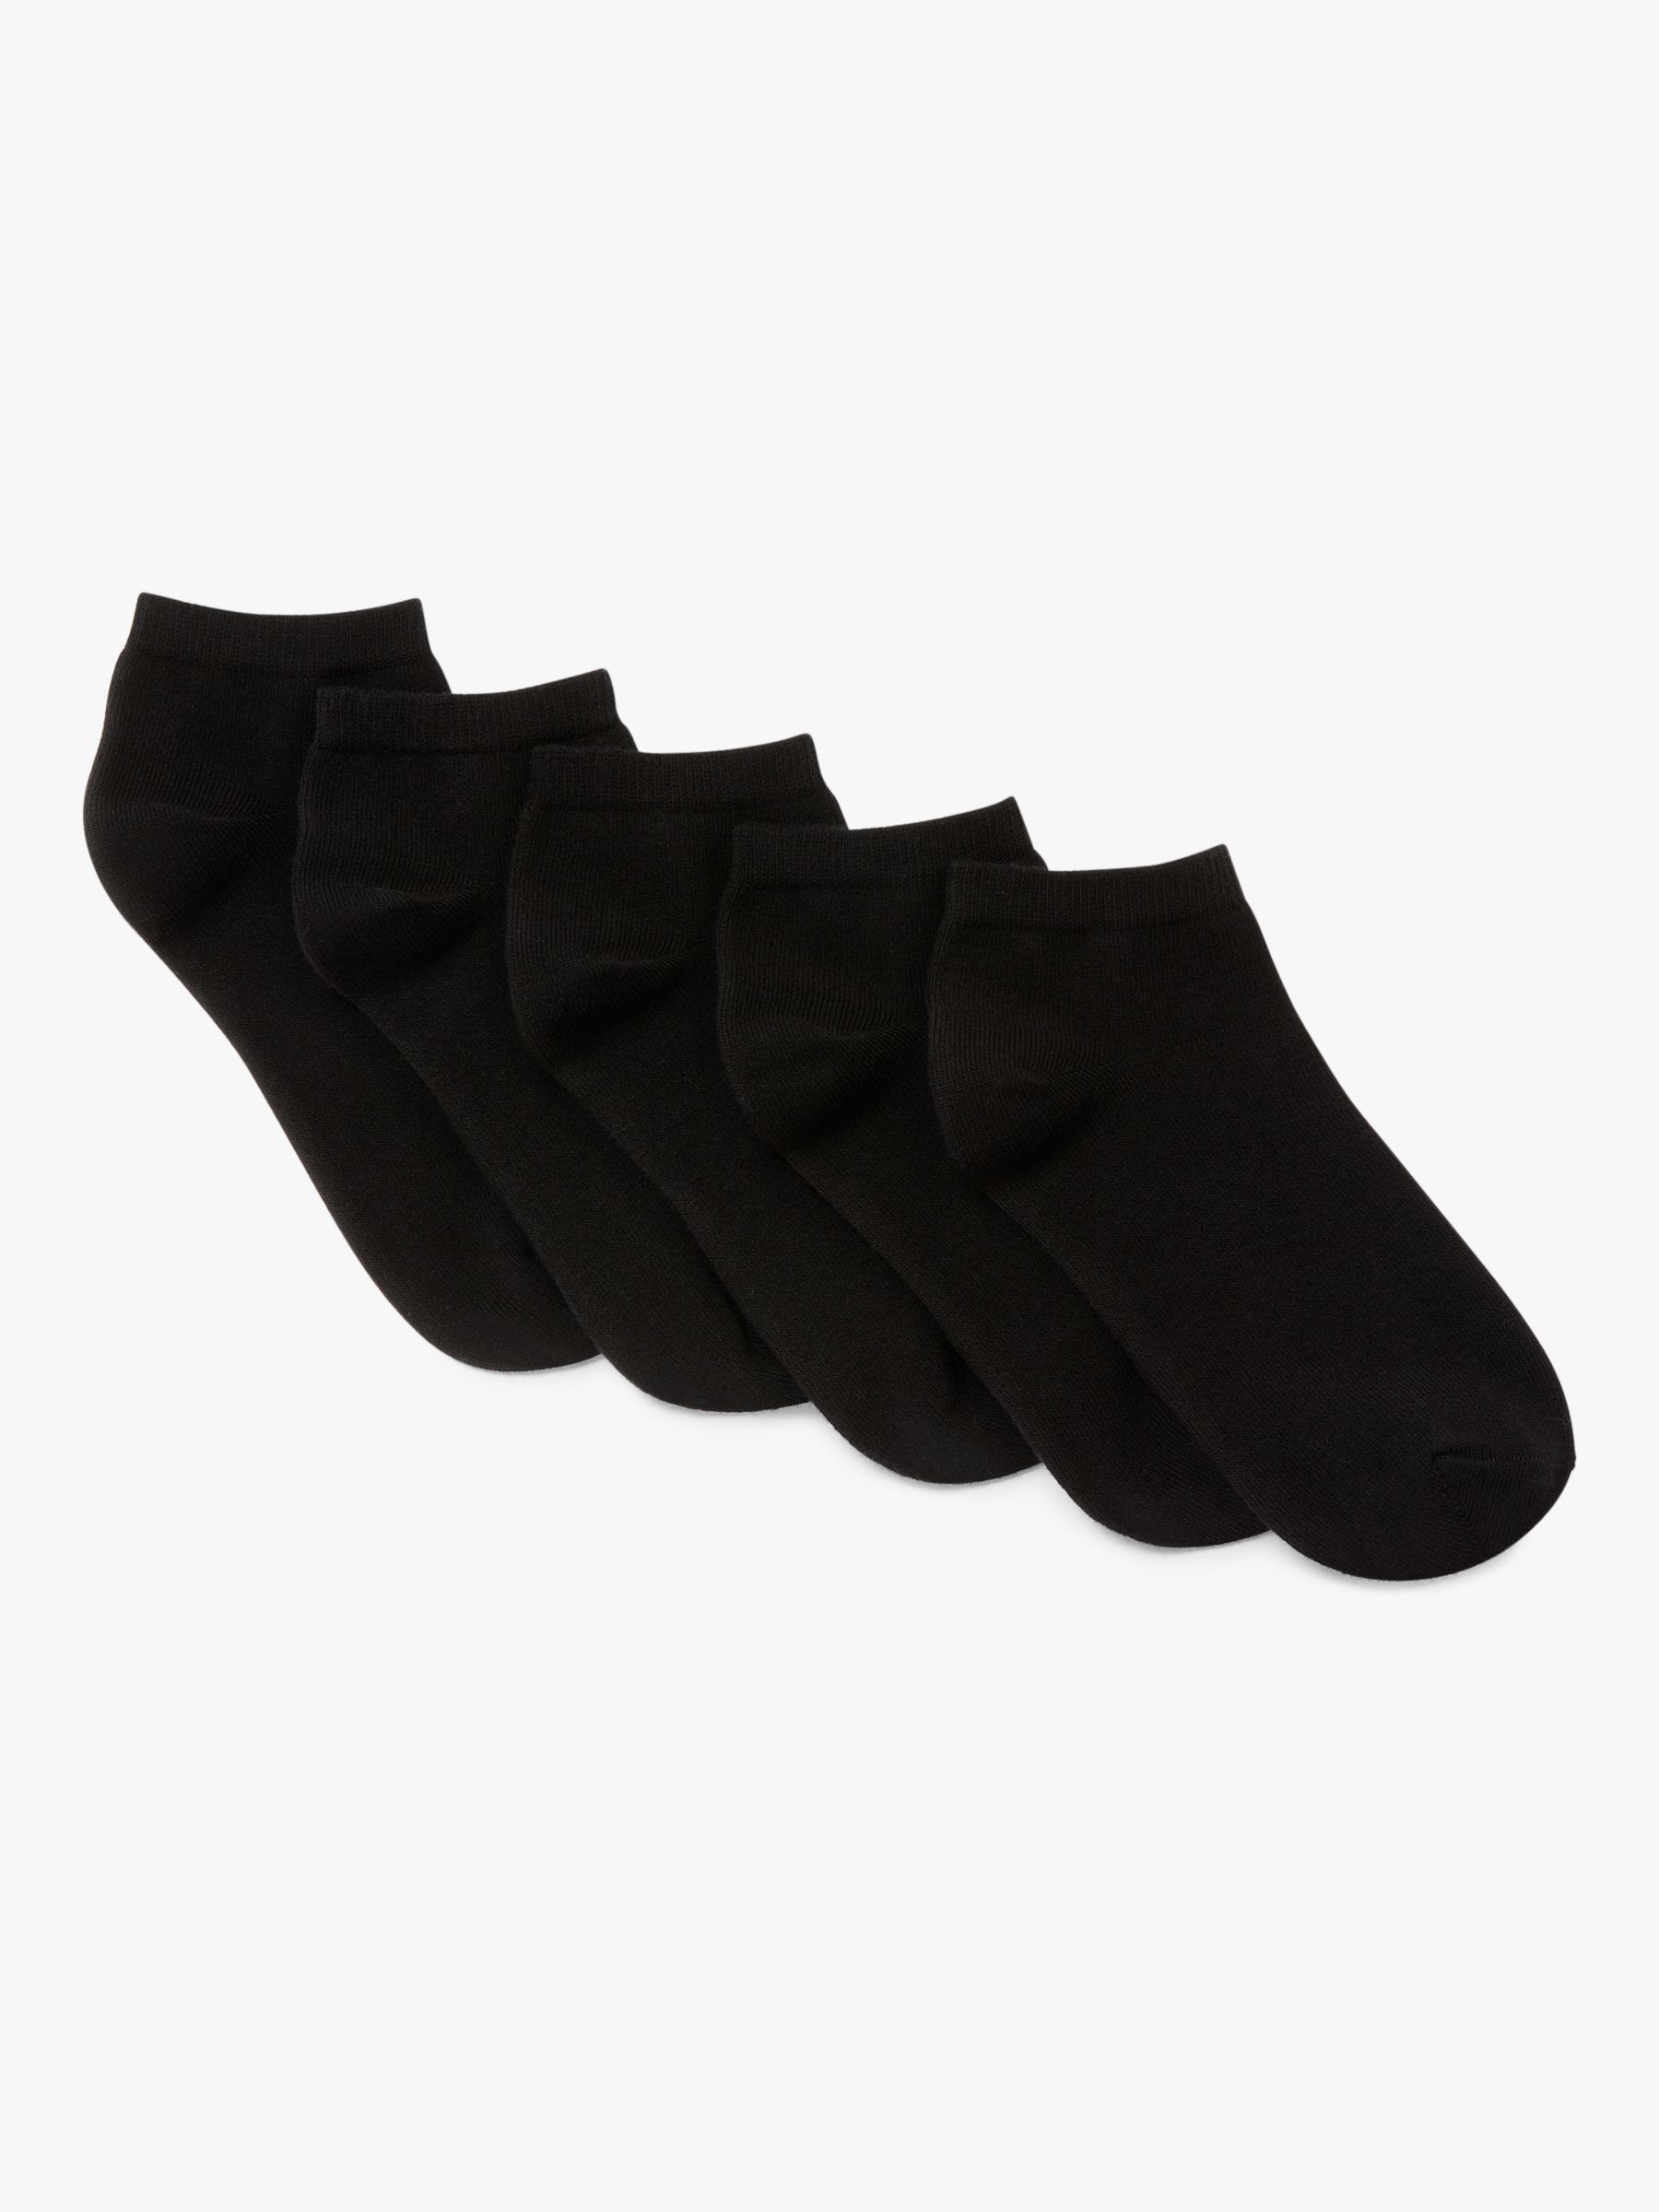 John Lewis ANYDAY Women's Cotton Mix Trainer Socks, Pack of 5, Black at ...